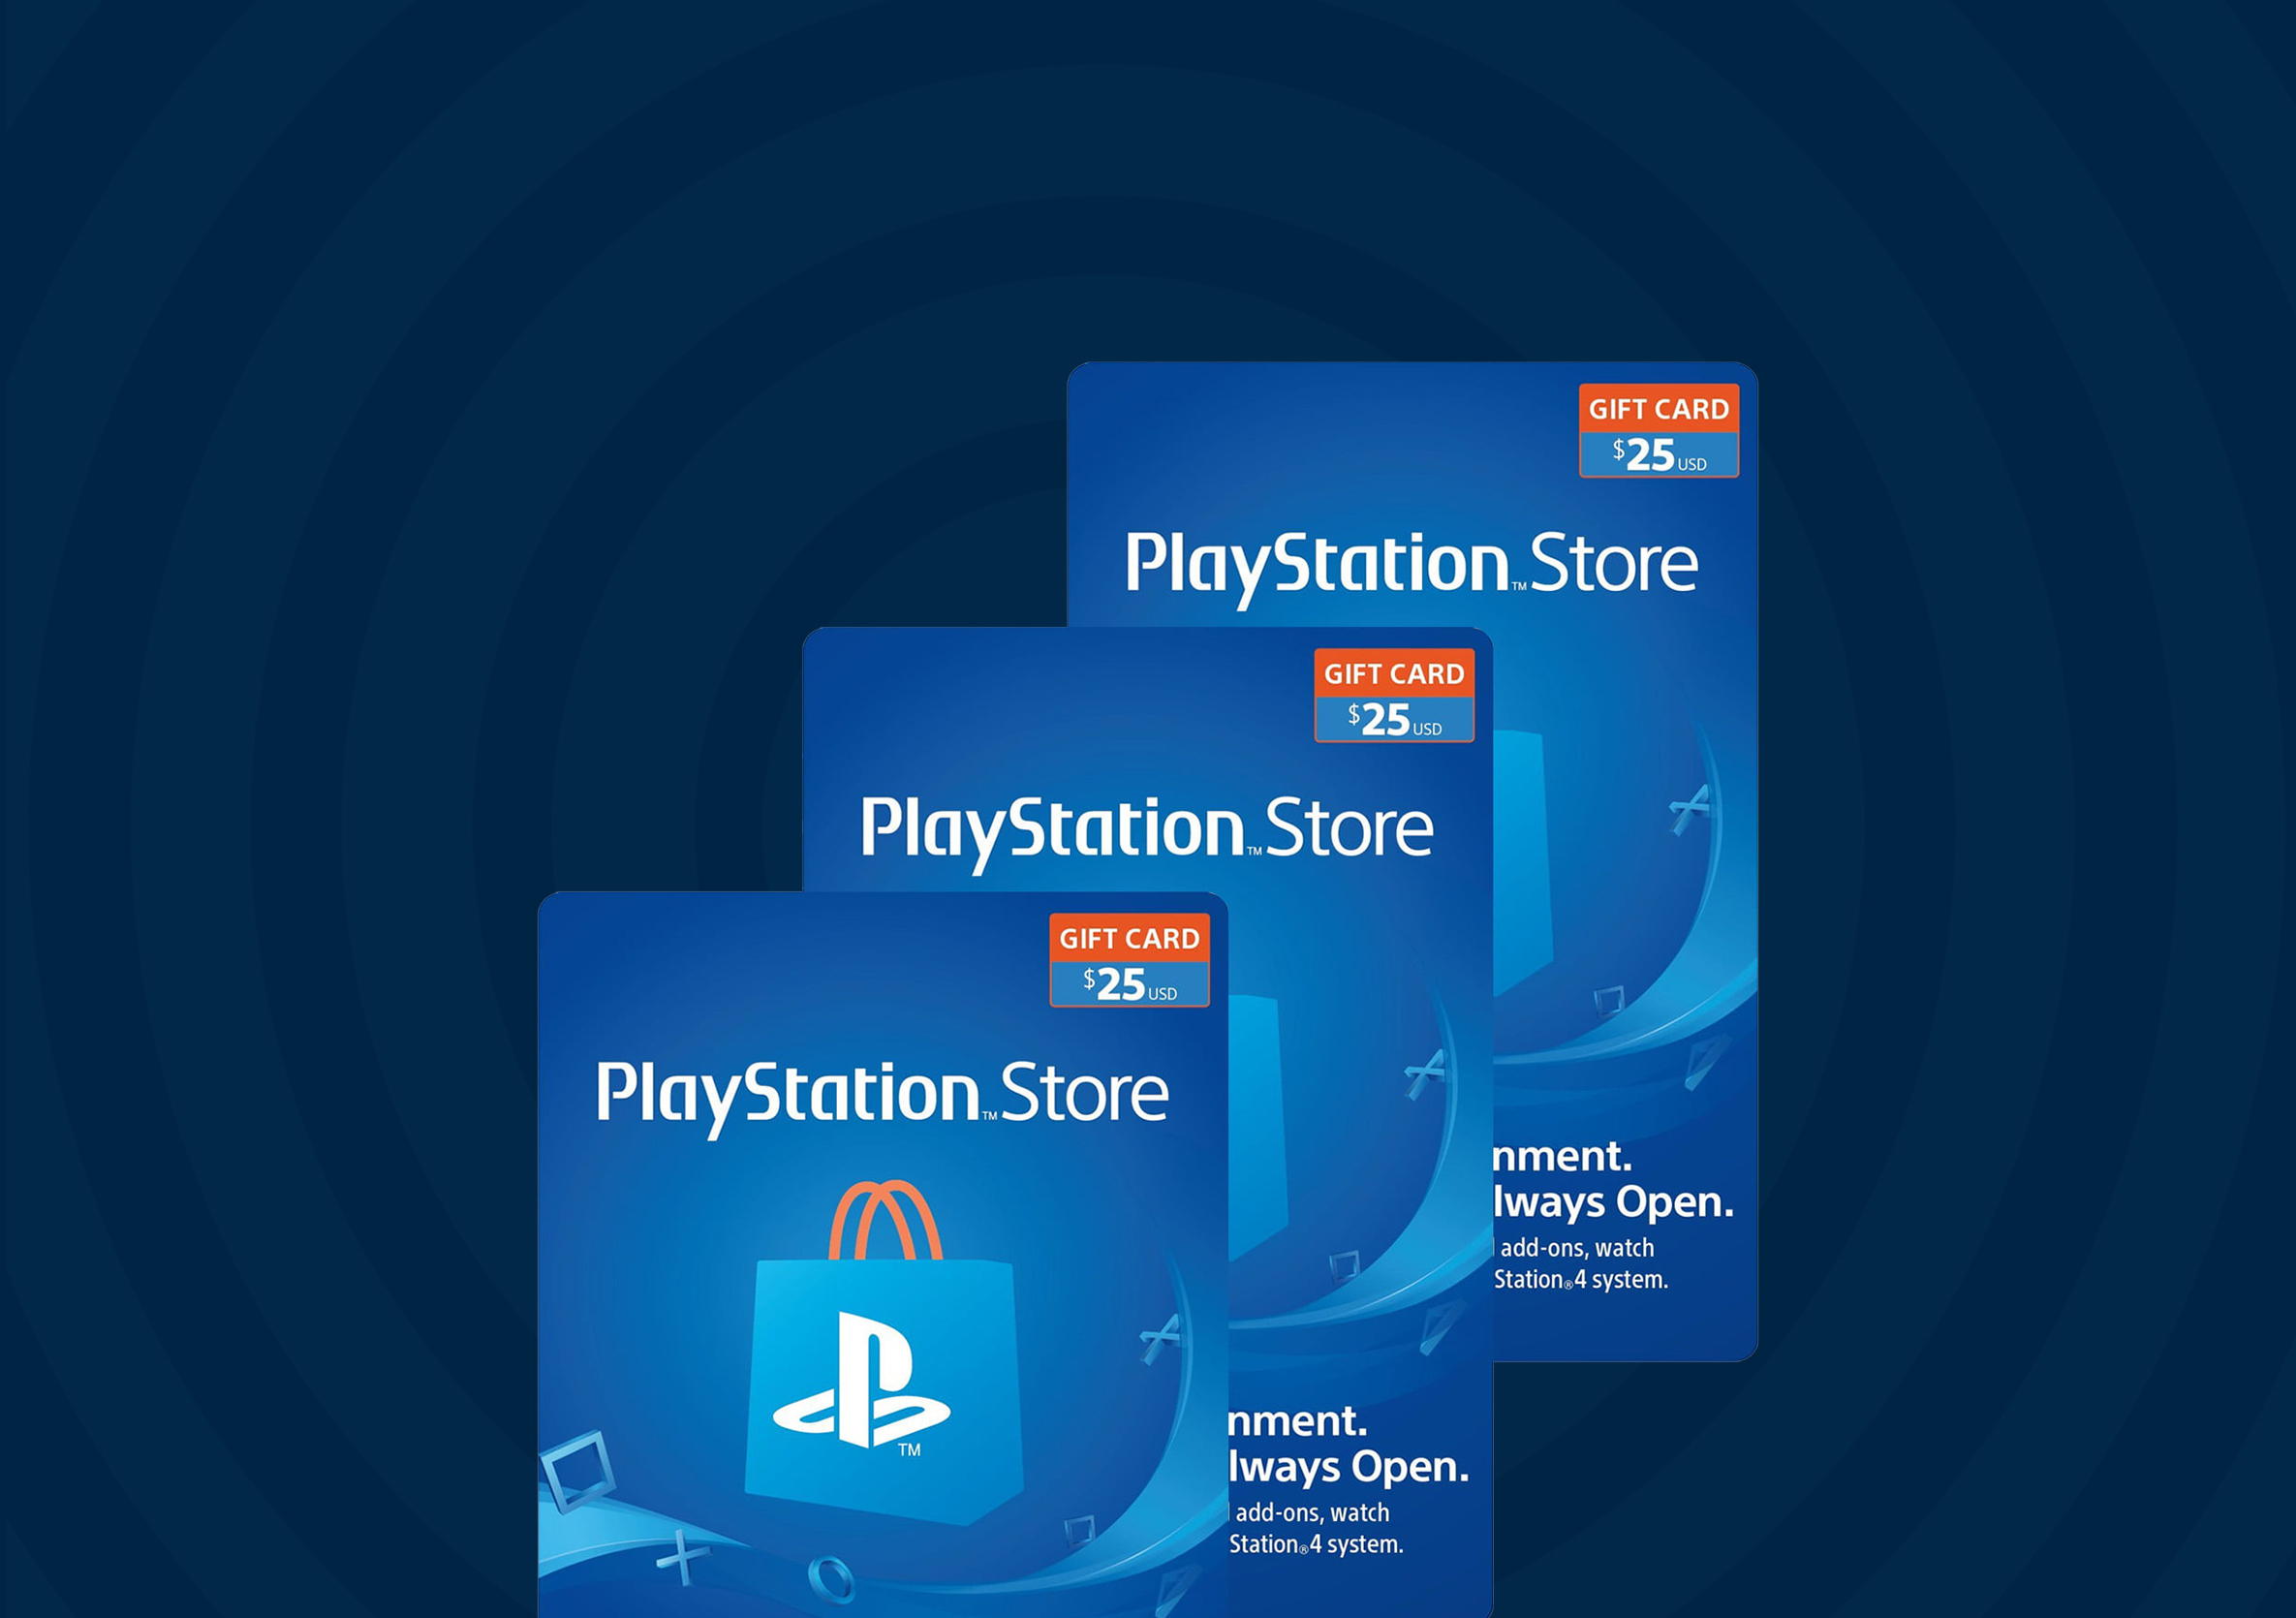 An image of a Playstation gift card.